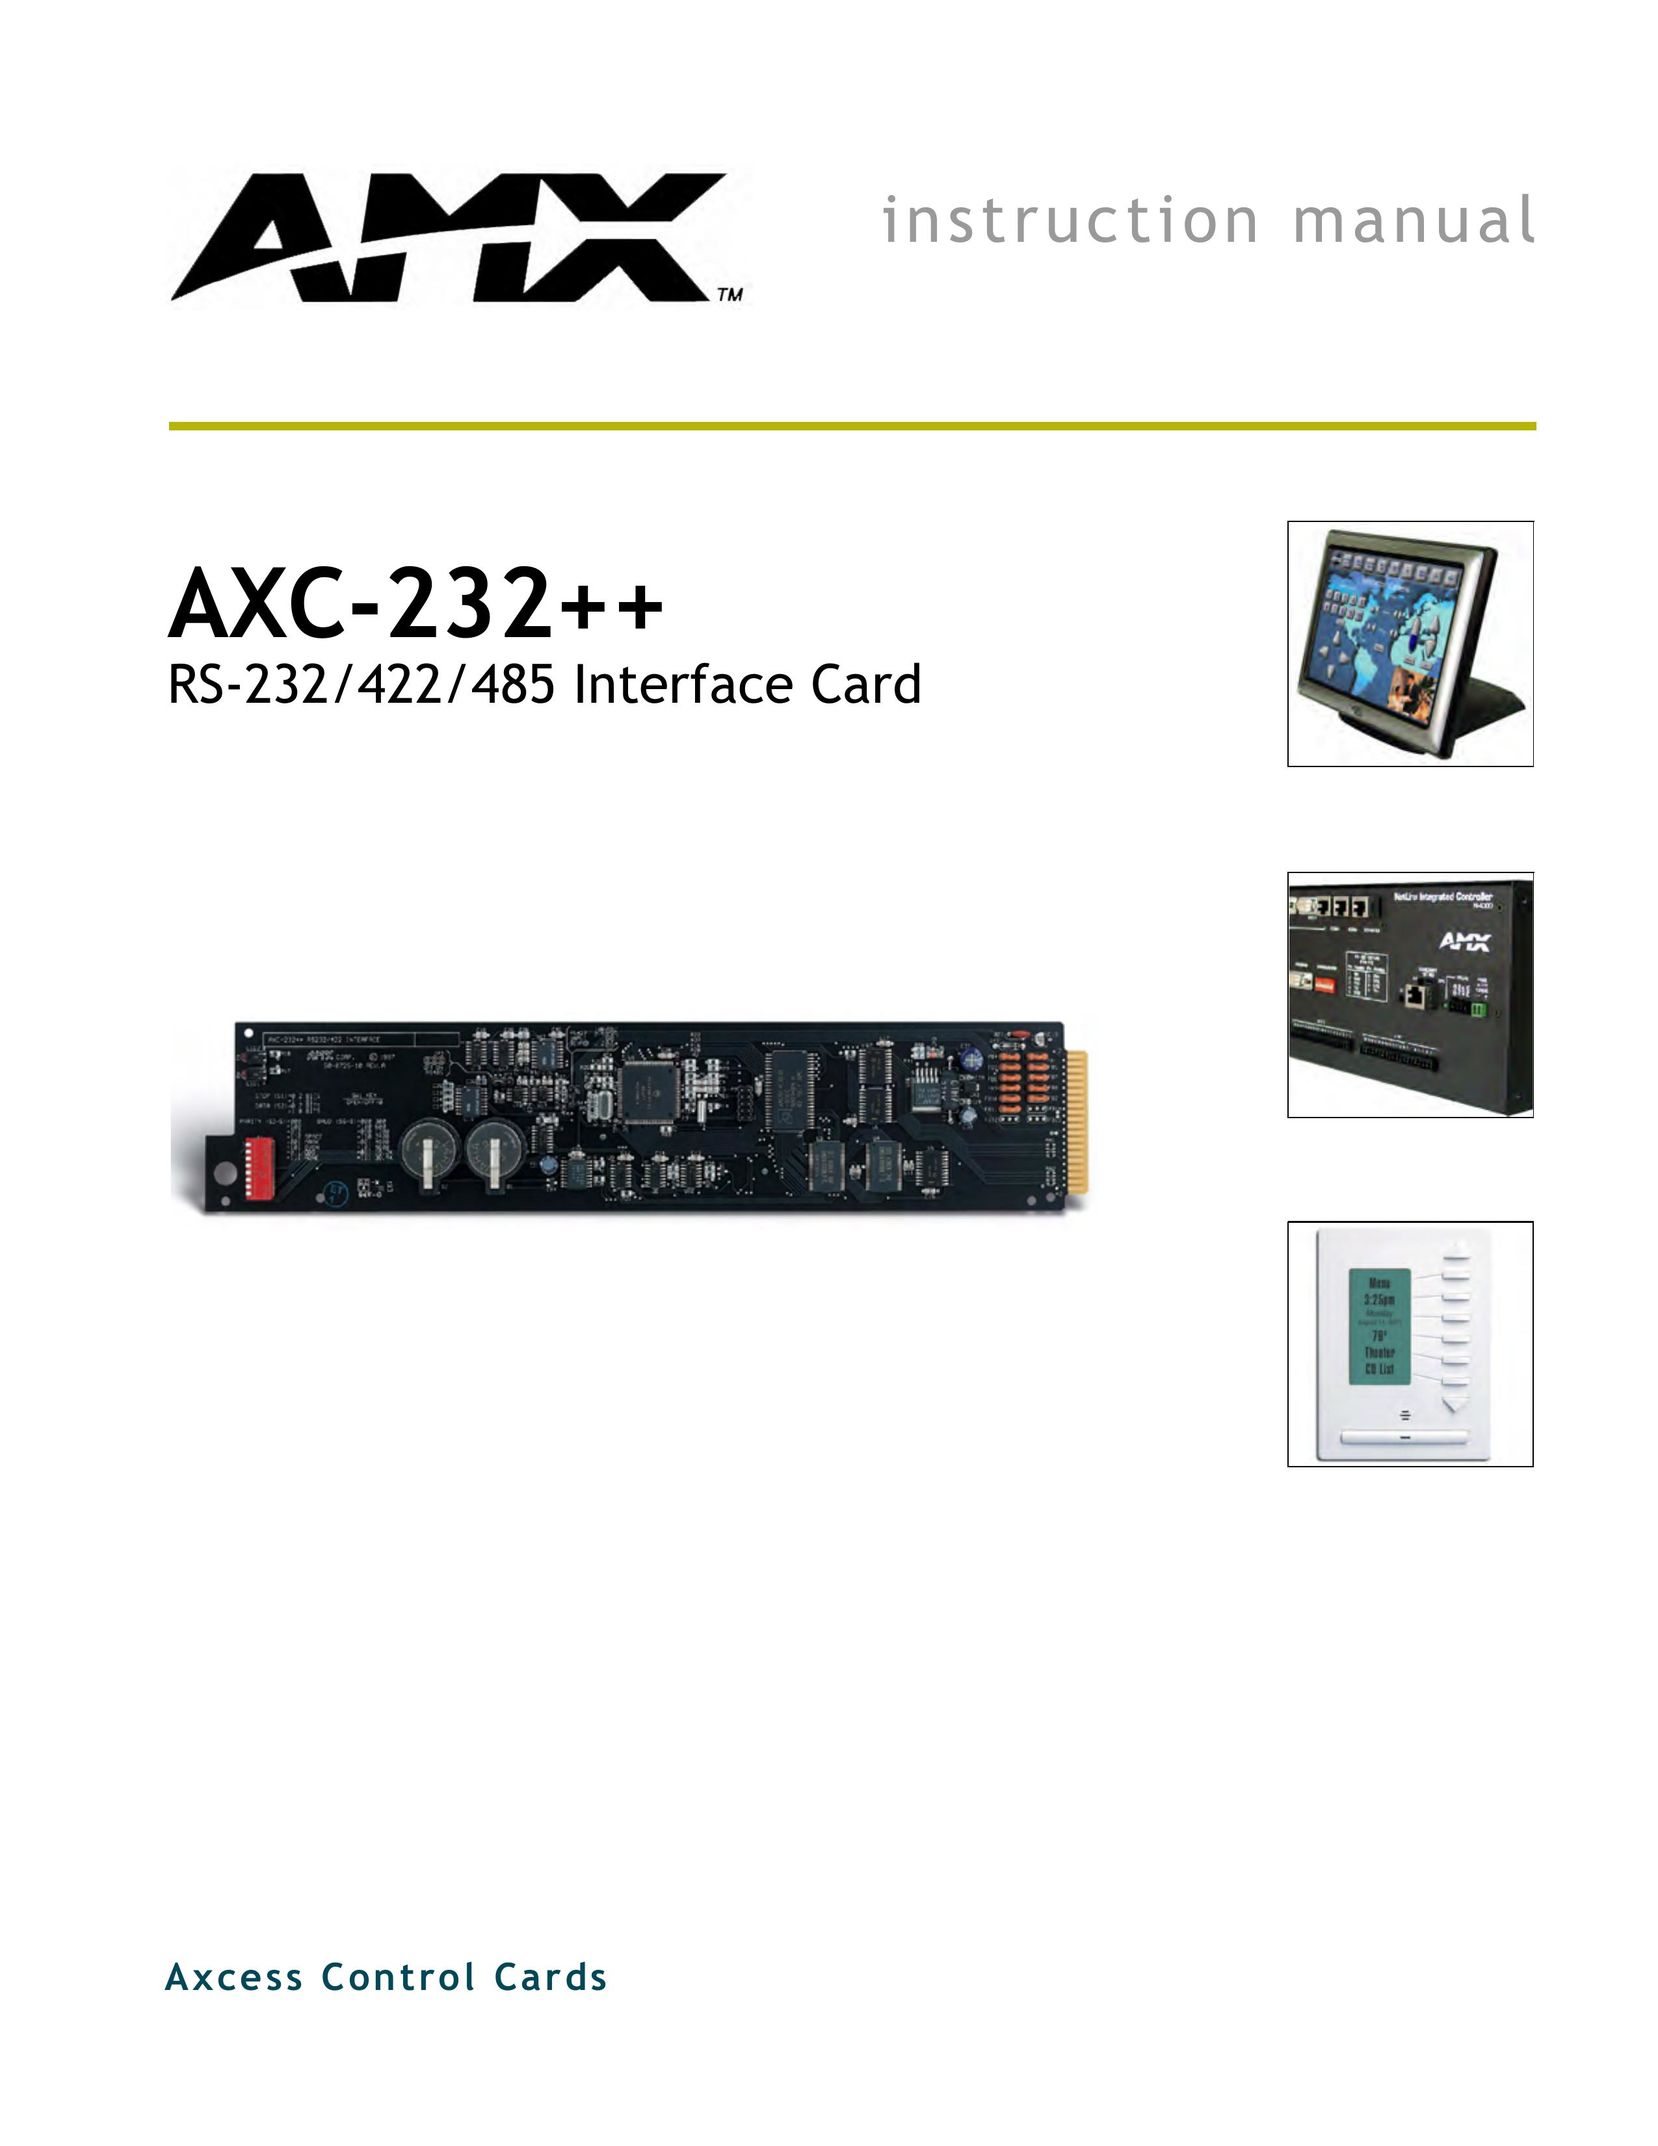 AMX AXC-232++ Network Card User Manual